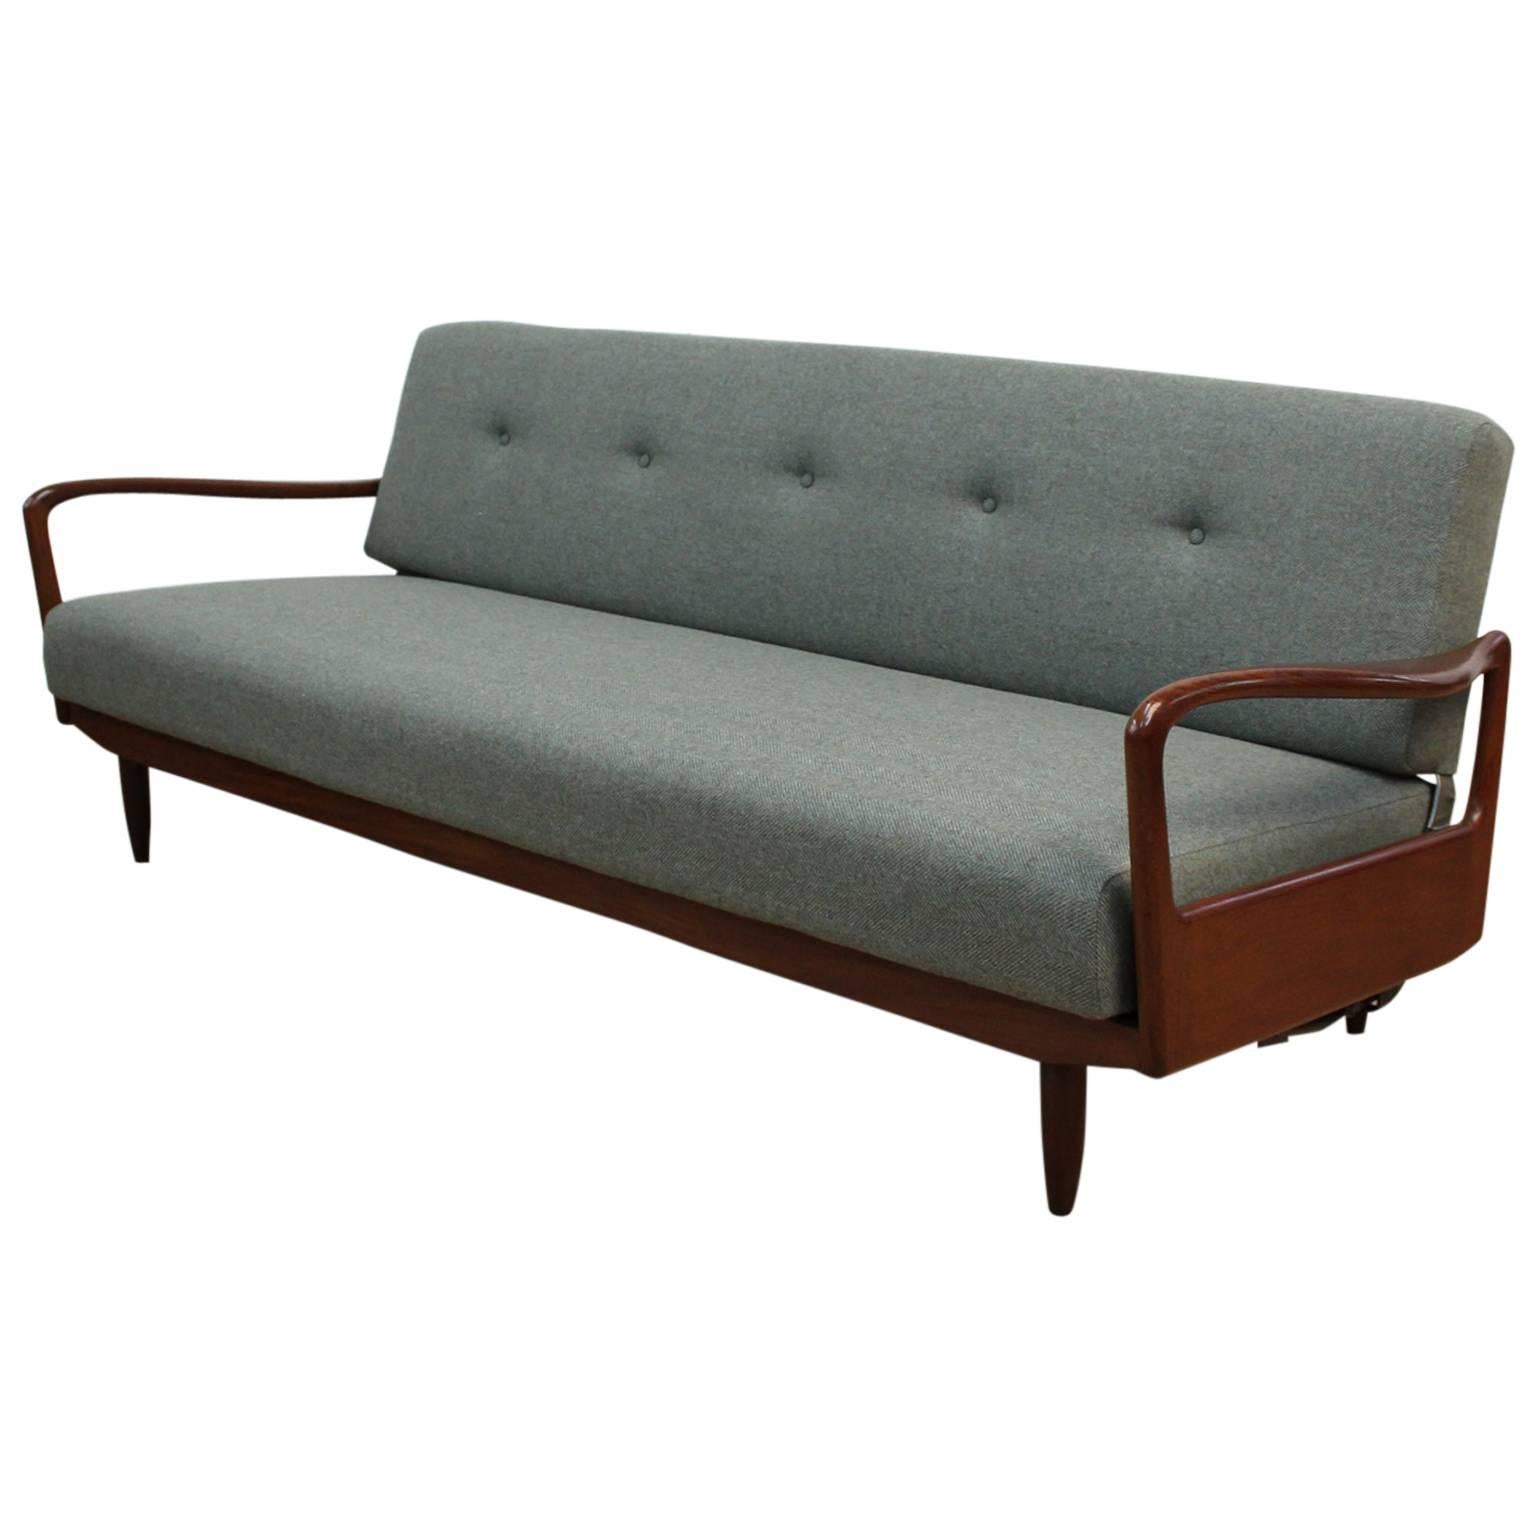 Greaves & Thomas Midcentury Sofa Bed with Teak Arms, Fully Restored in Wool